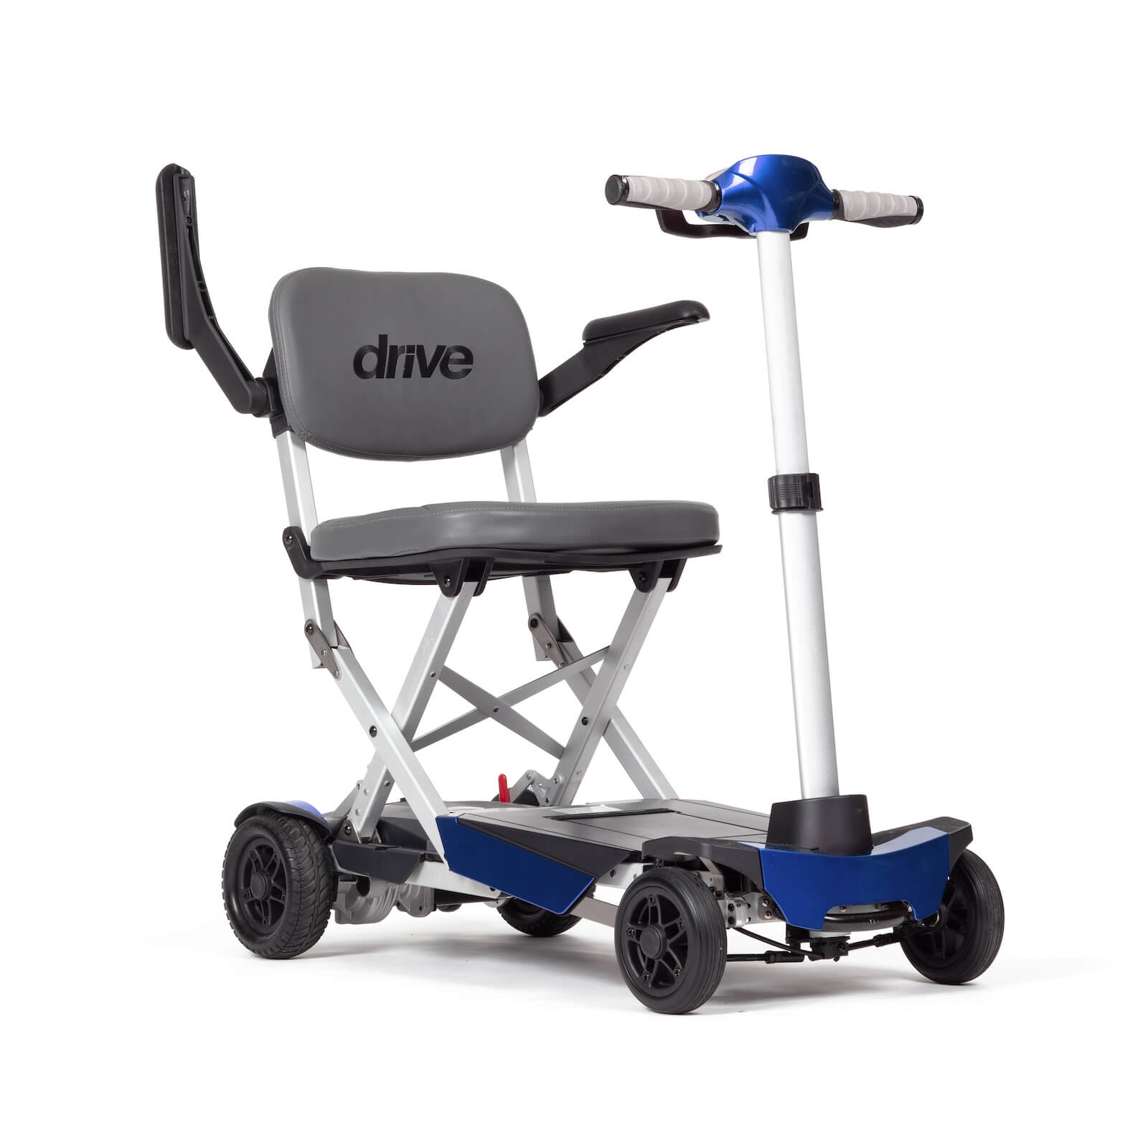 Drive Manual Fold+ Scooter - Lightweight & Portable Mobility